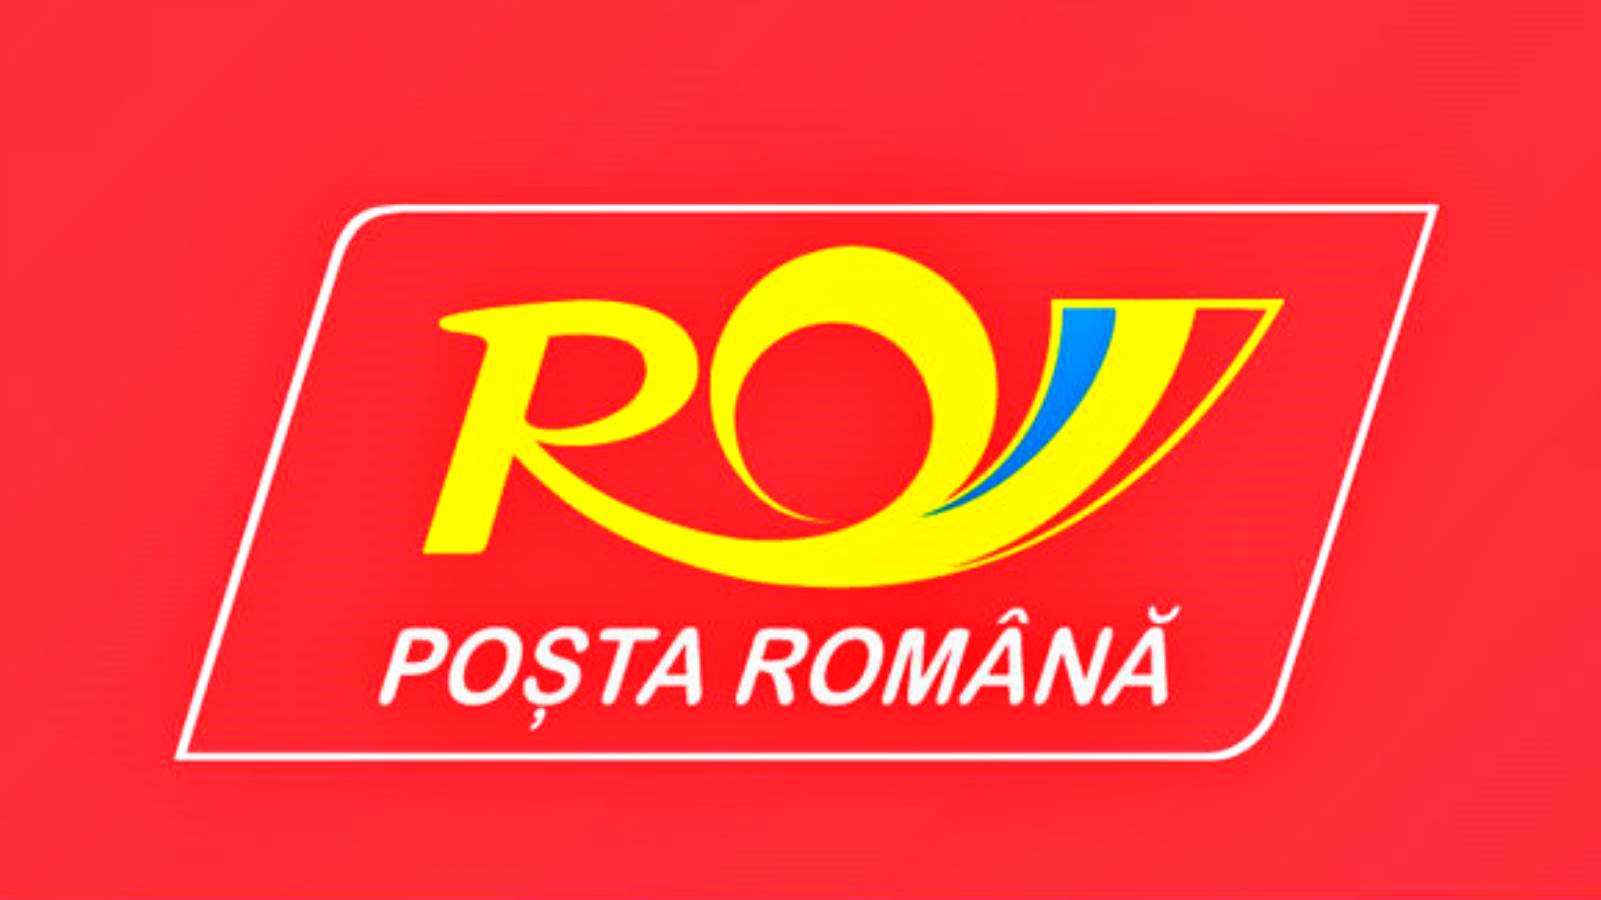 Romanian Post Official Surprise, which it offers for FREE to Romanians